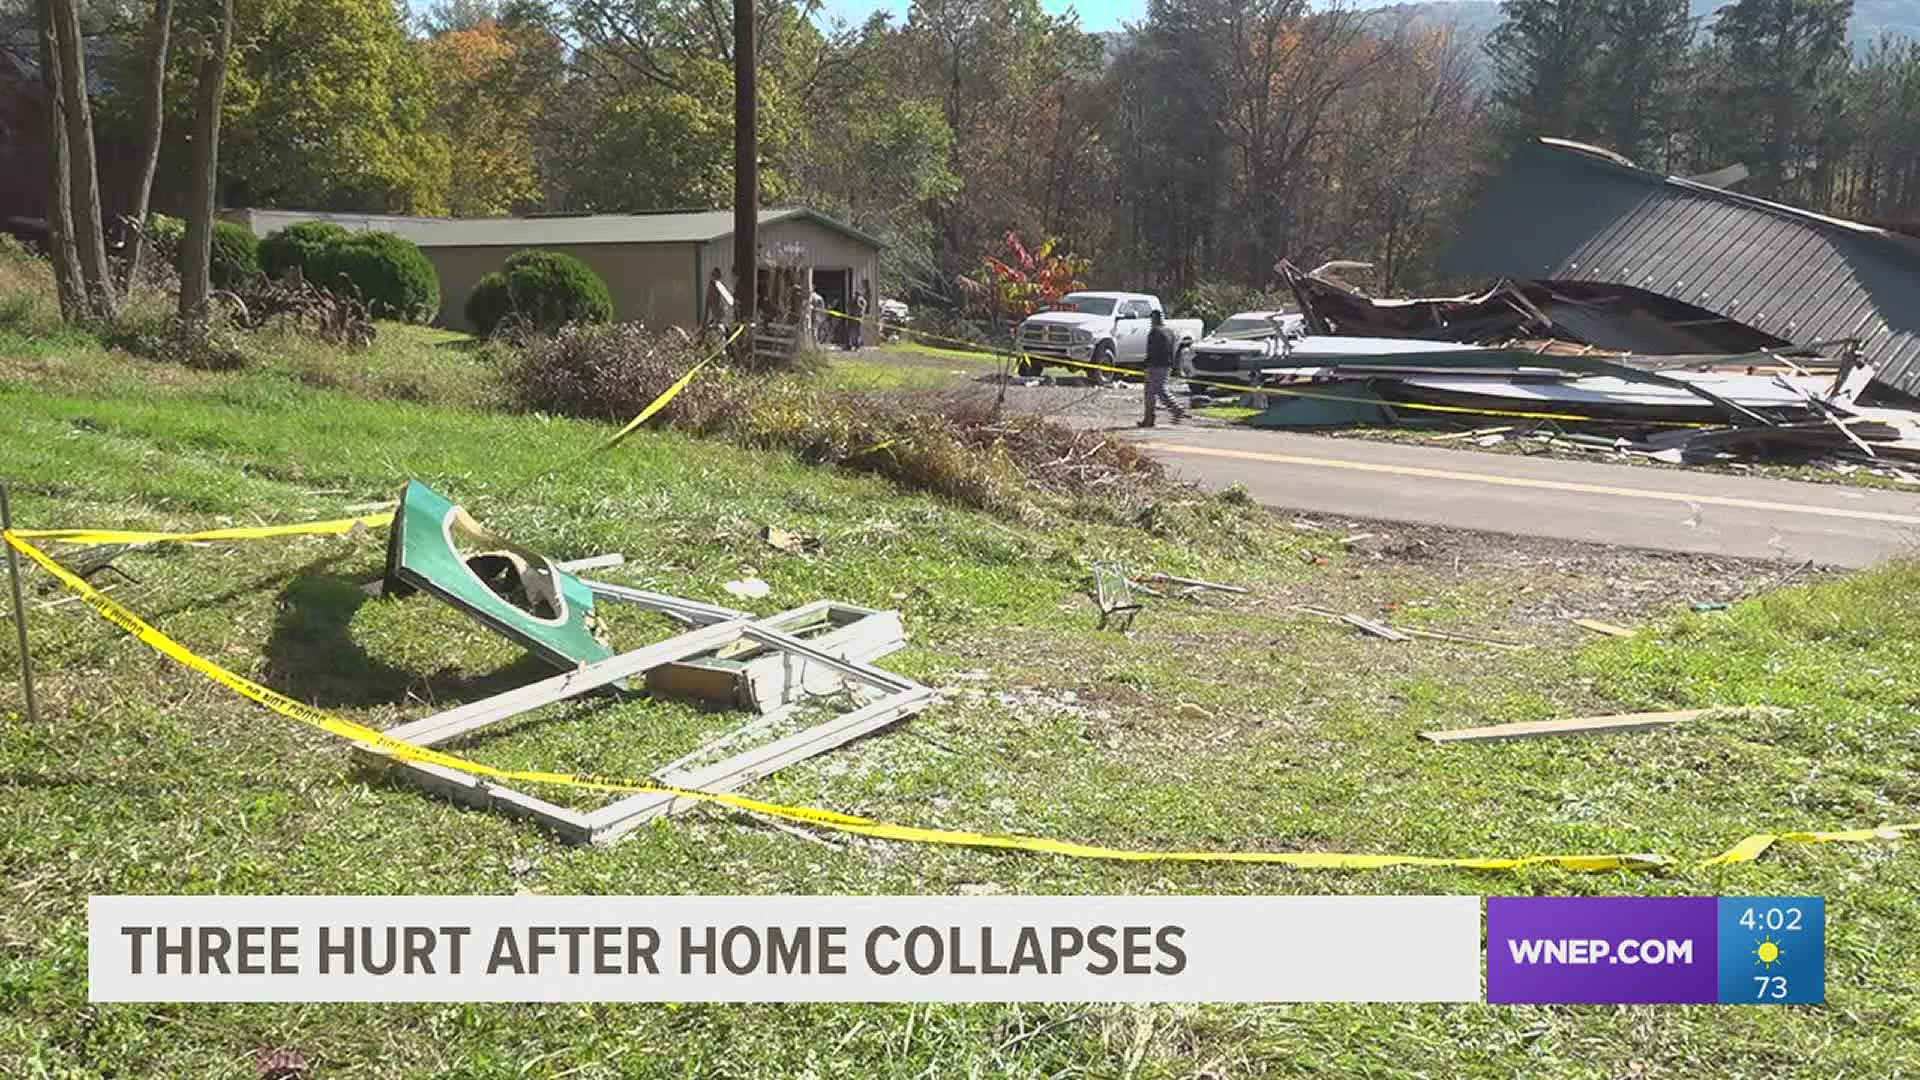 It's unclear what caused the home to collapse along Winding Creek Road in Fishing Creek Township.